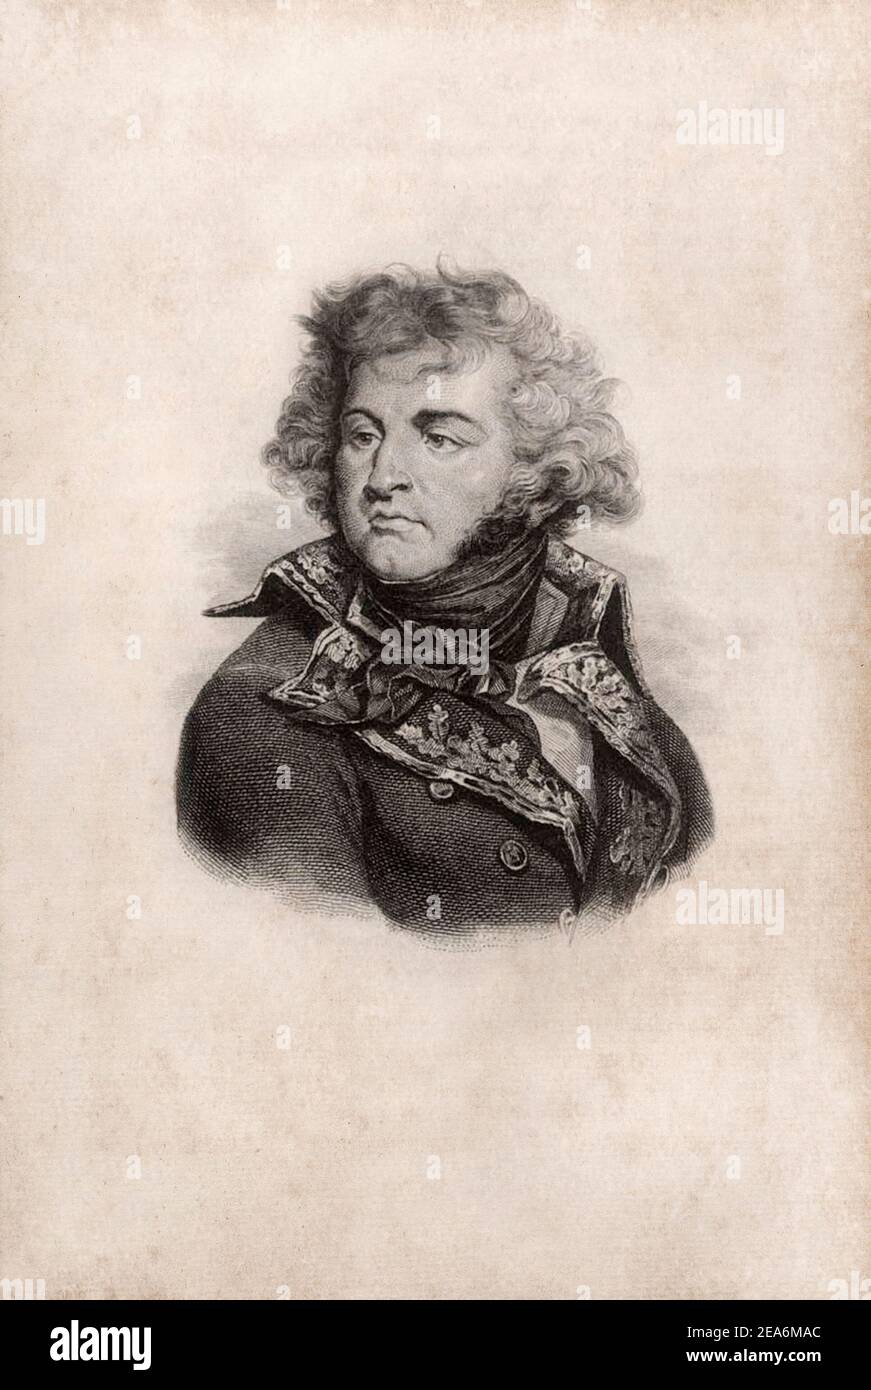 Jean-Baptiste Kleber (1753 – 1800) was a French general during the French  Revolutionary Wars. His military career started in Habsburg service, but  his Stock Photo - Alamy